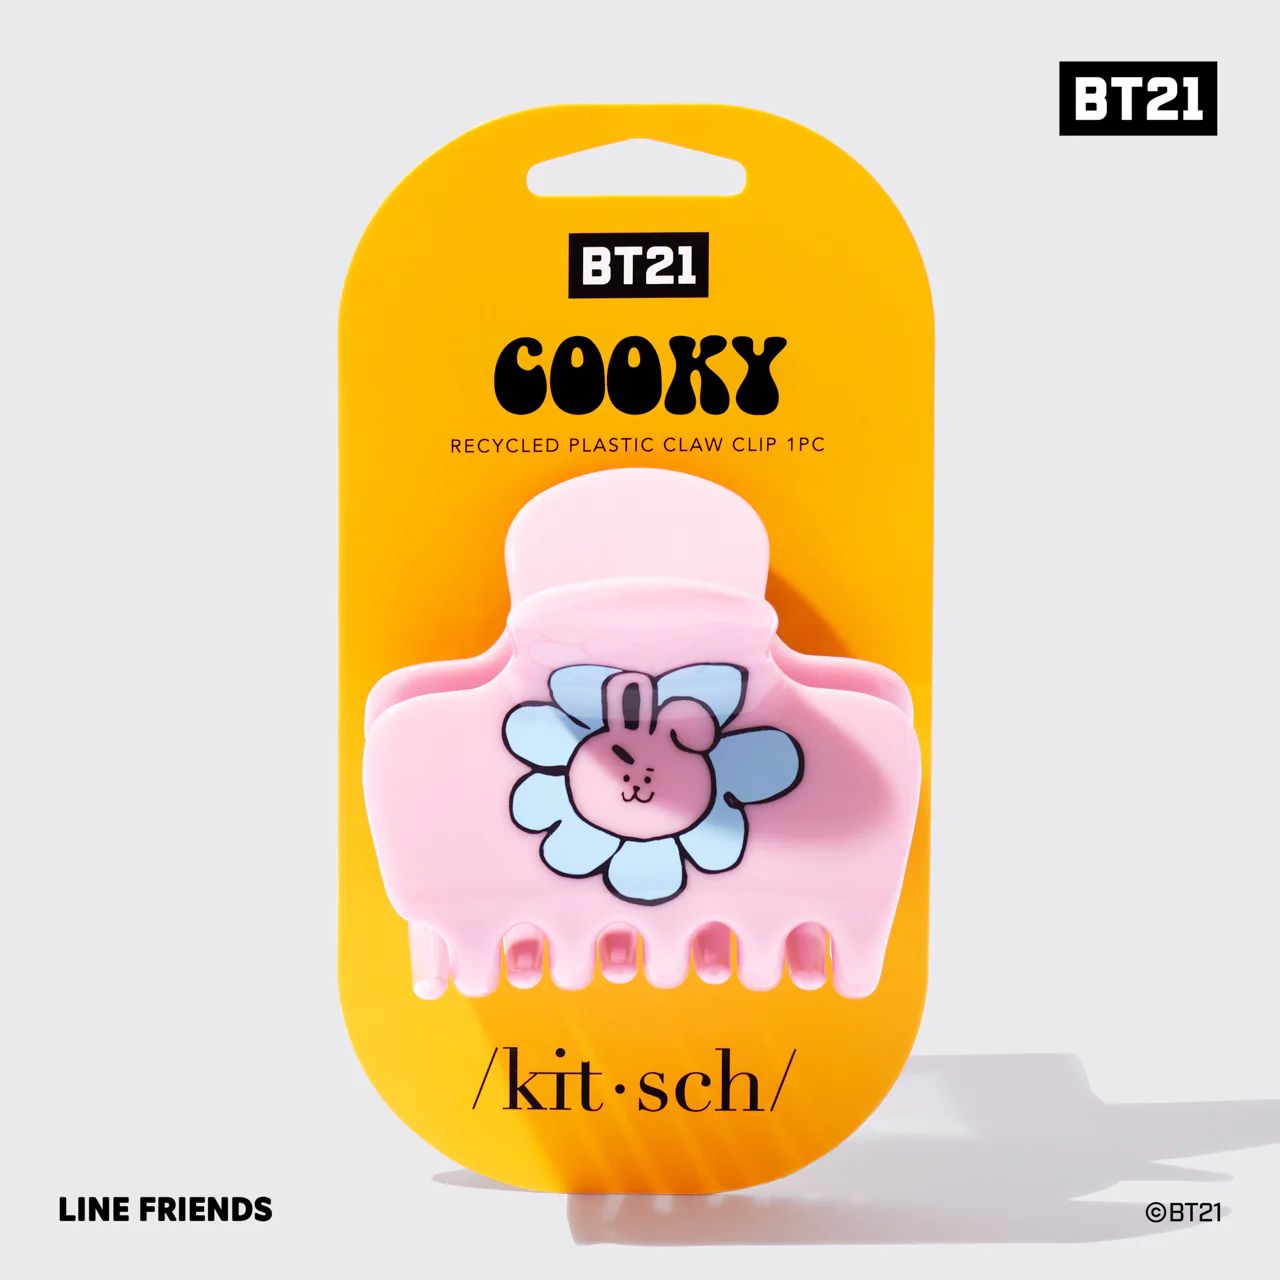 BT21 meets Kitsch Recycled Plastic Puffy Claw Clip 1pc - COOKY | Kitsch